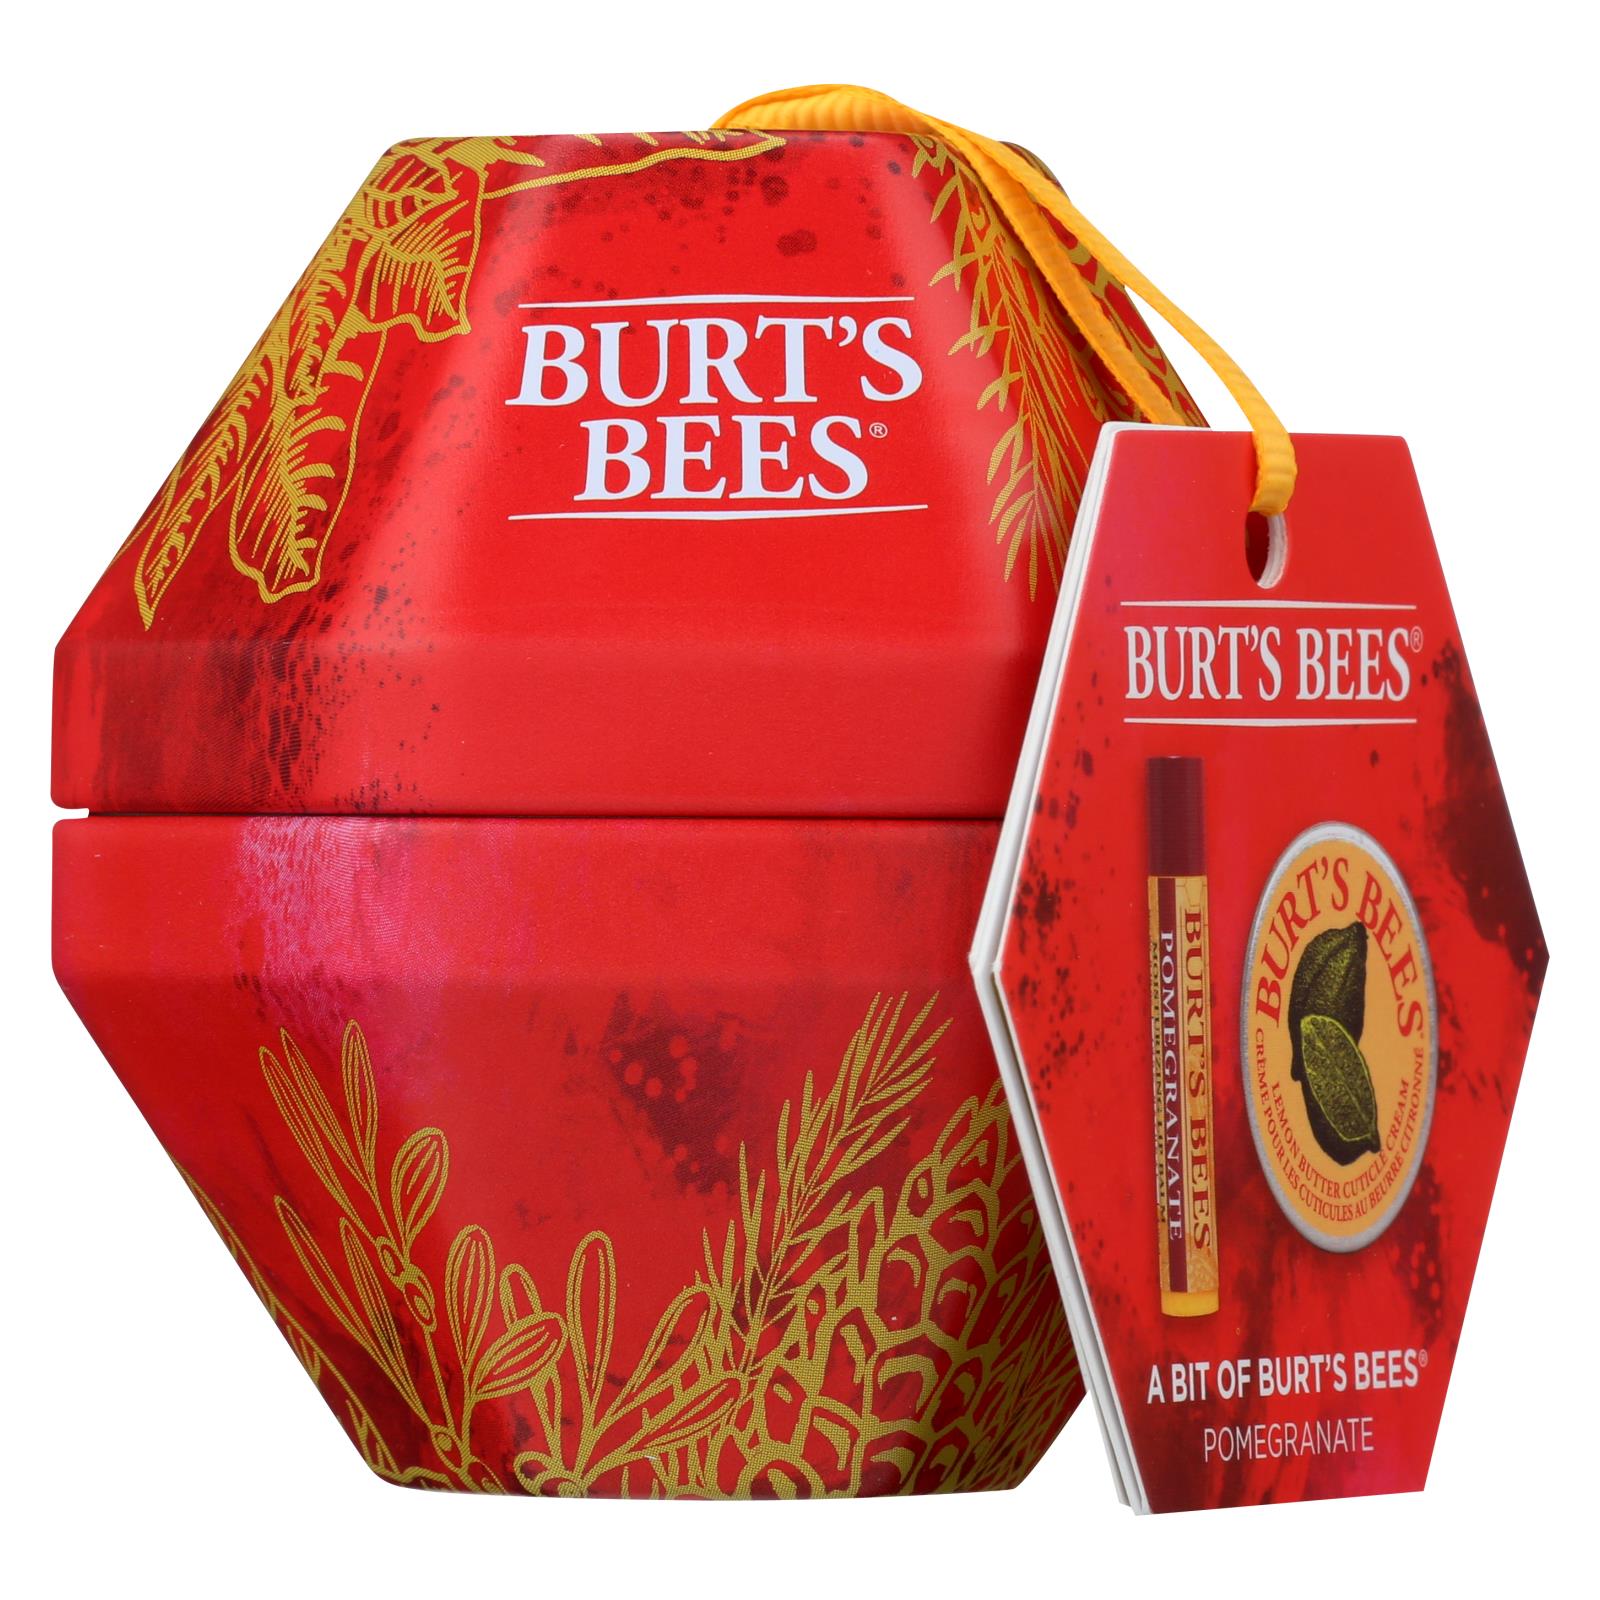 Burts Bees - Gift Pack Pomegranate - Case of 5 - 1 CT